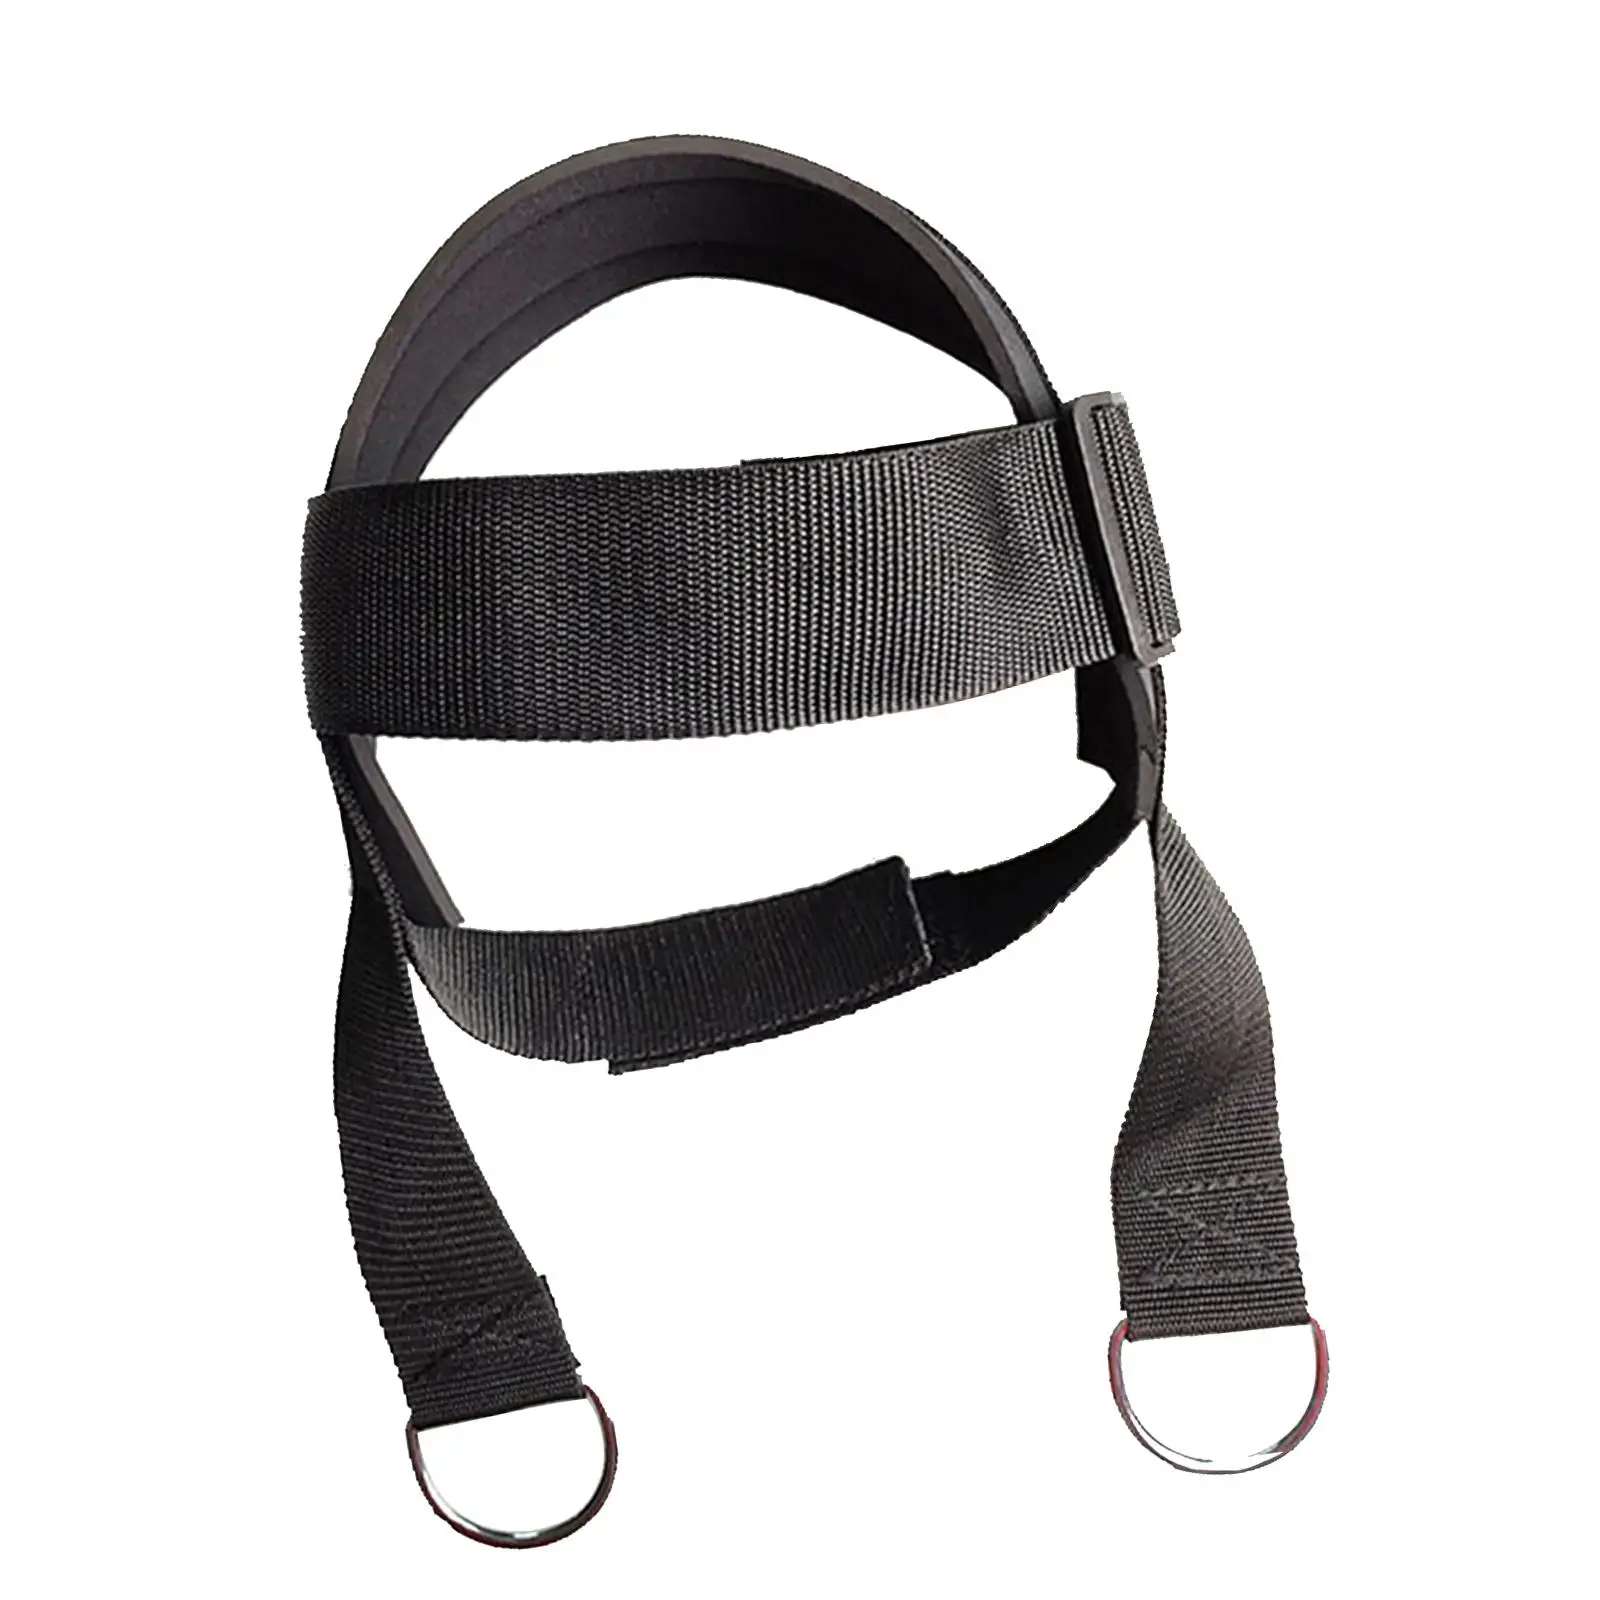 Weight Lifting Equipment with Metal Loop Muscle Building Bodybuilding Head Neck Harness for Dip Belt Unisex Chain Strap Home